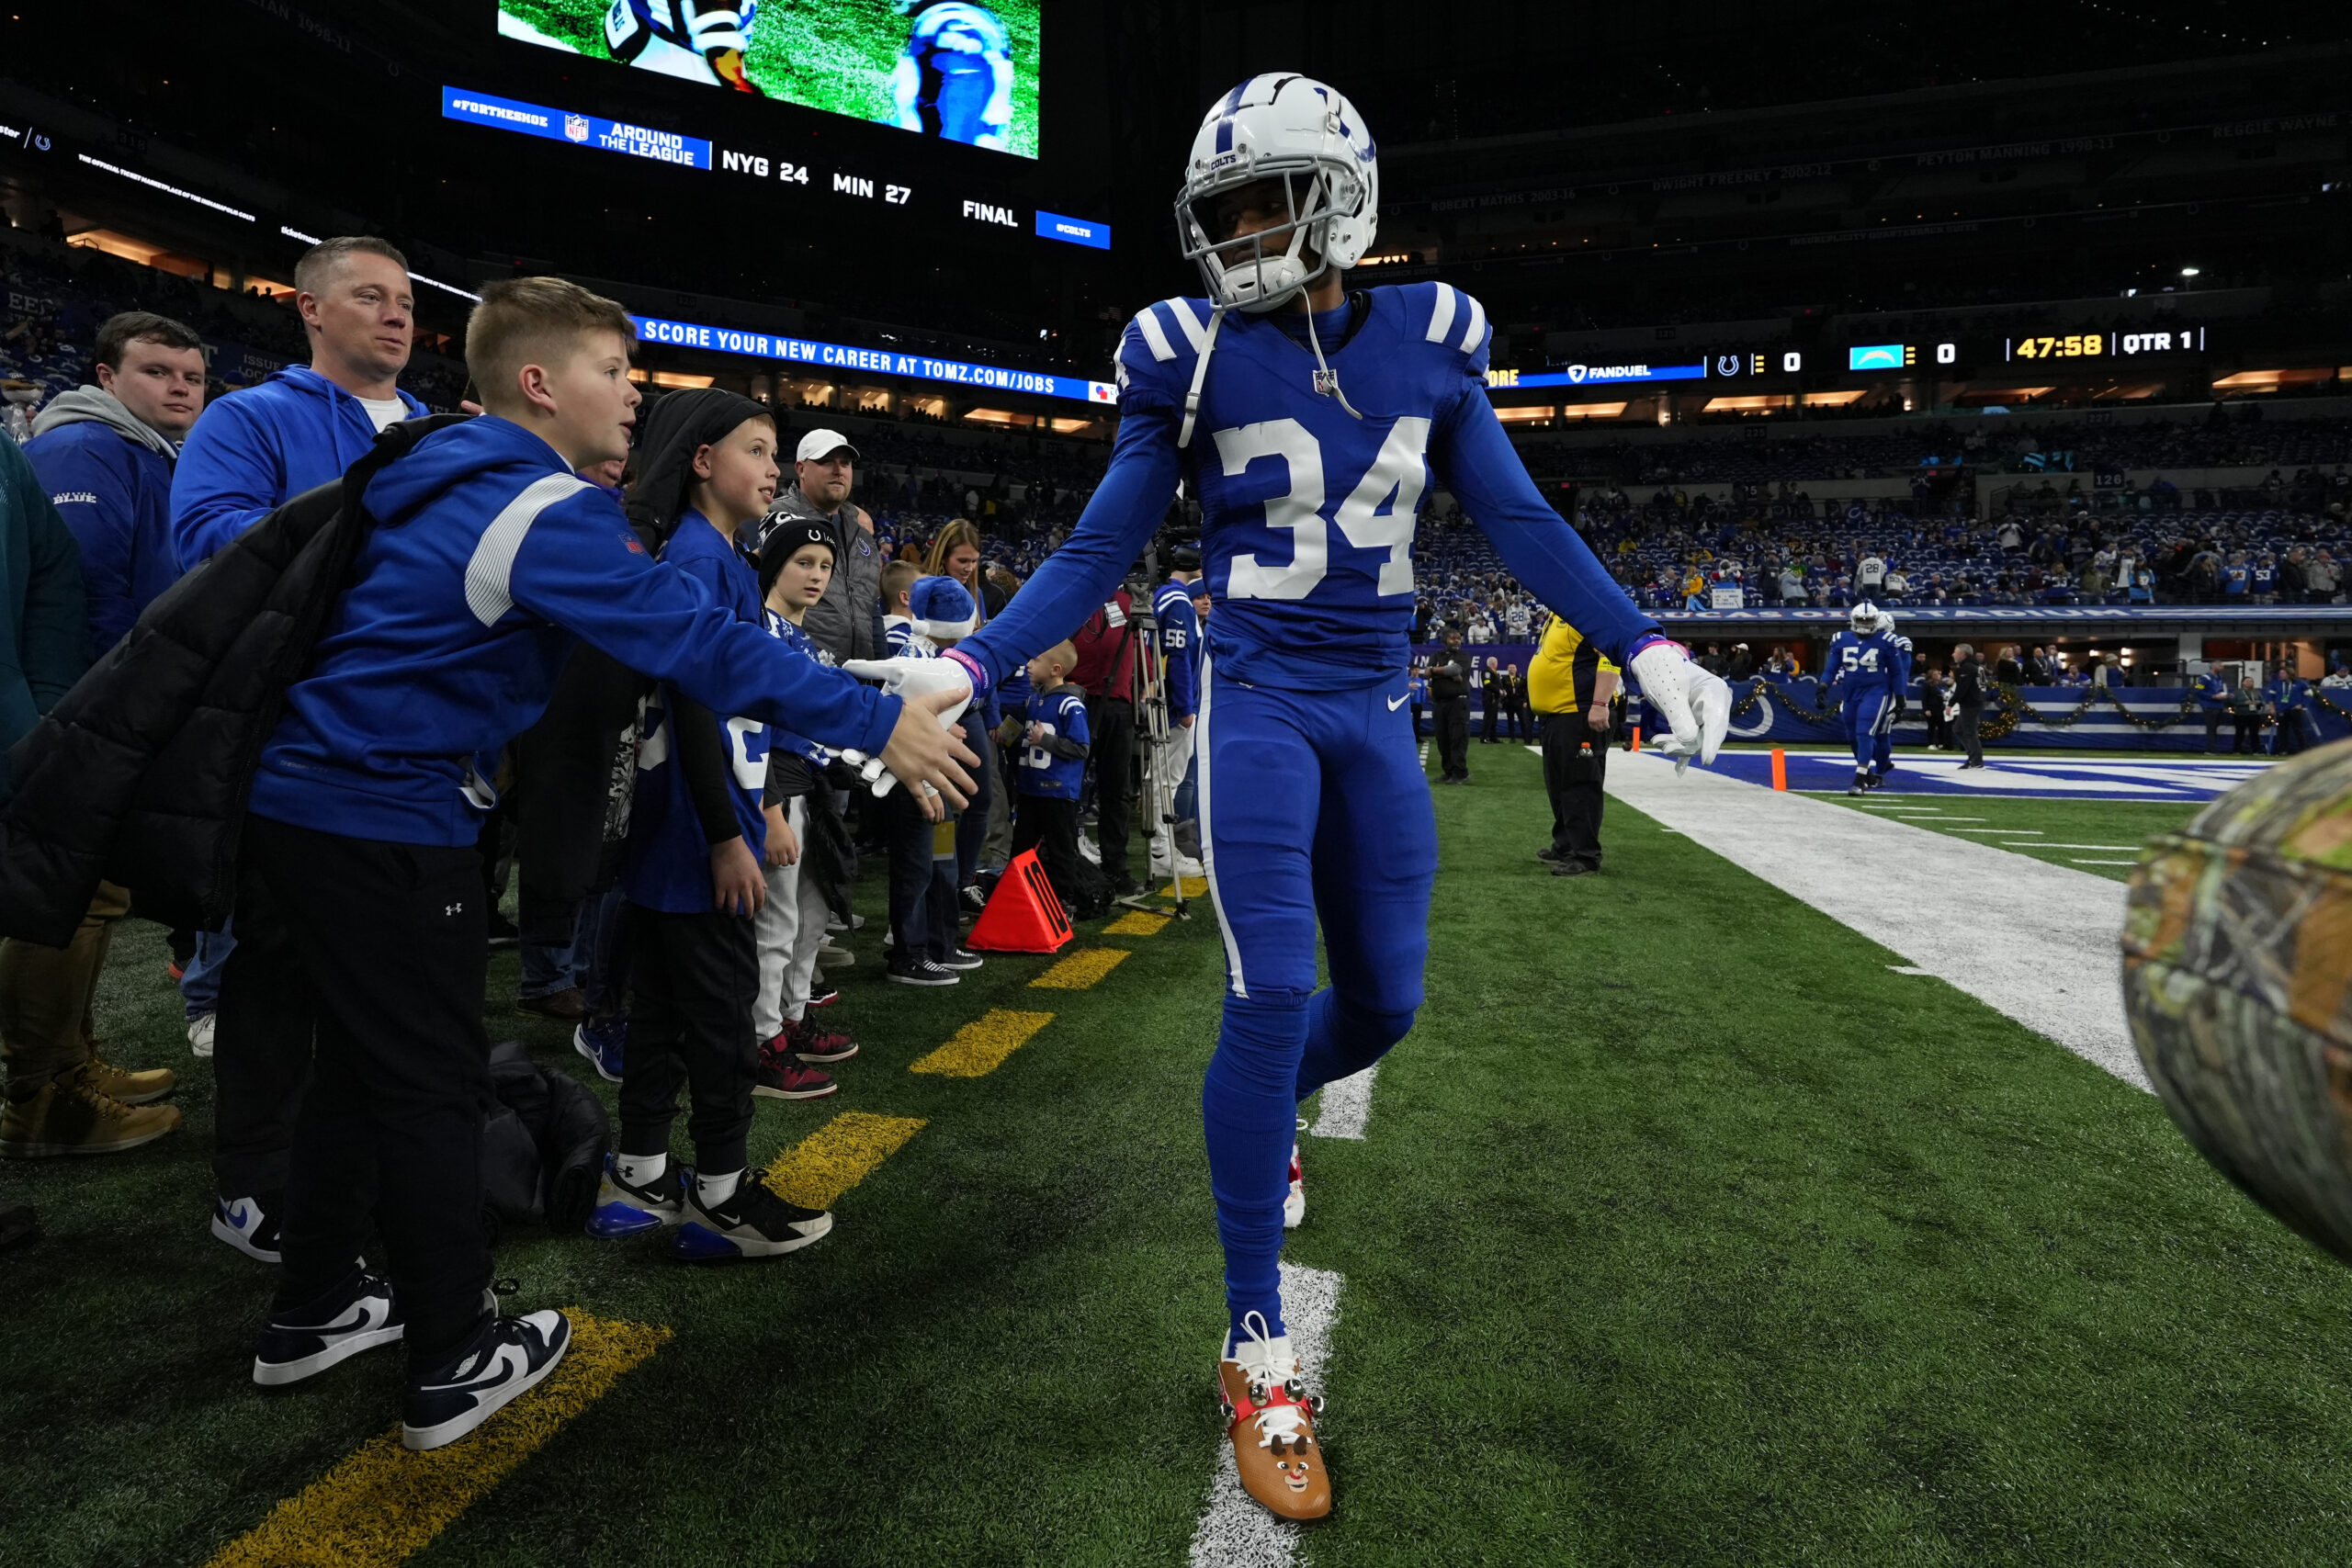 INDIANAPOLIS, INDIANA - DECEMBER 26: Isaiah Rodgers Sr. #34 of the Indianapolis Colts warms up prior to playing the Los Angeles Chargers at Lucas Oil Stadium on December 26, 2022 in Indianapolis, Indiana. (Photo by Dylan Buell/Getty Images)